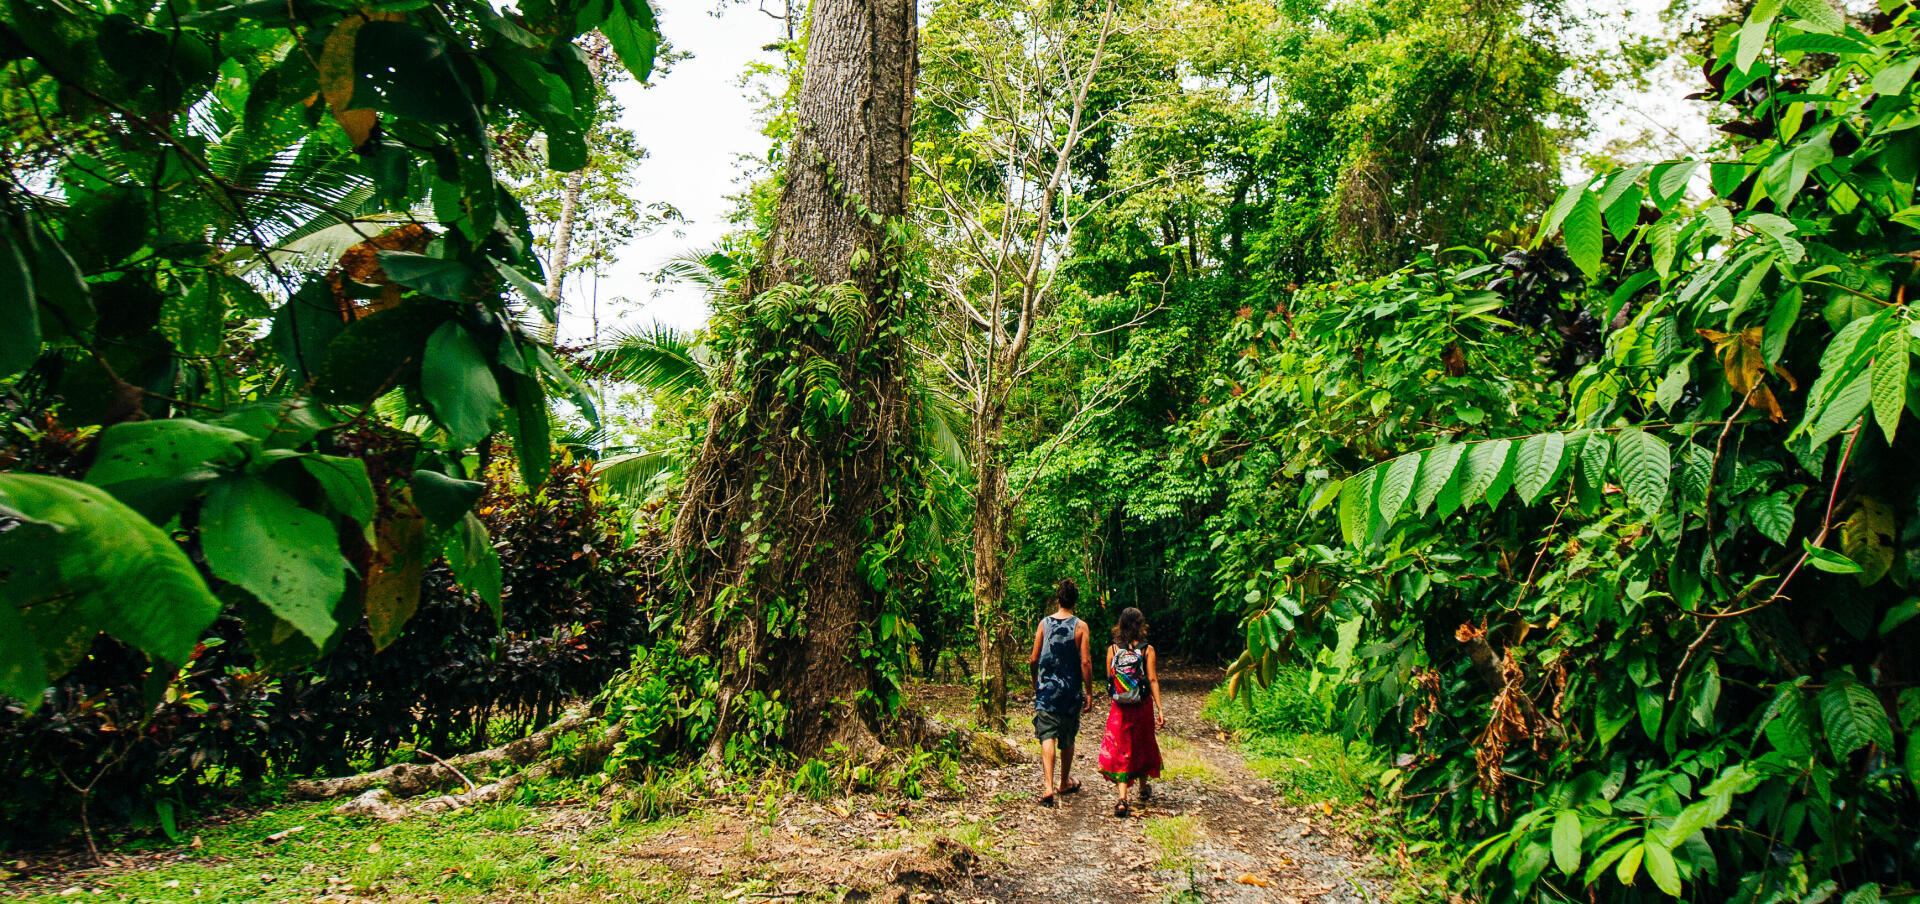 Hiking in Costa Rica: our ideas for adventure